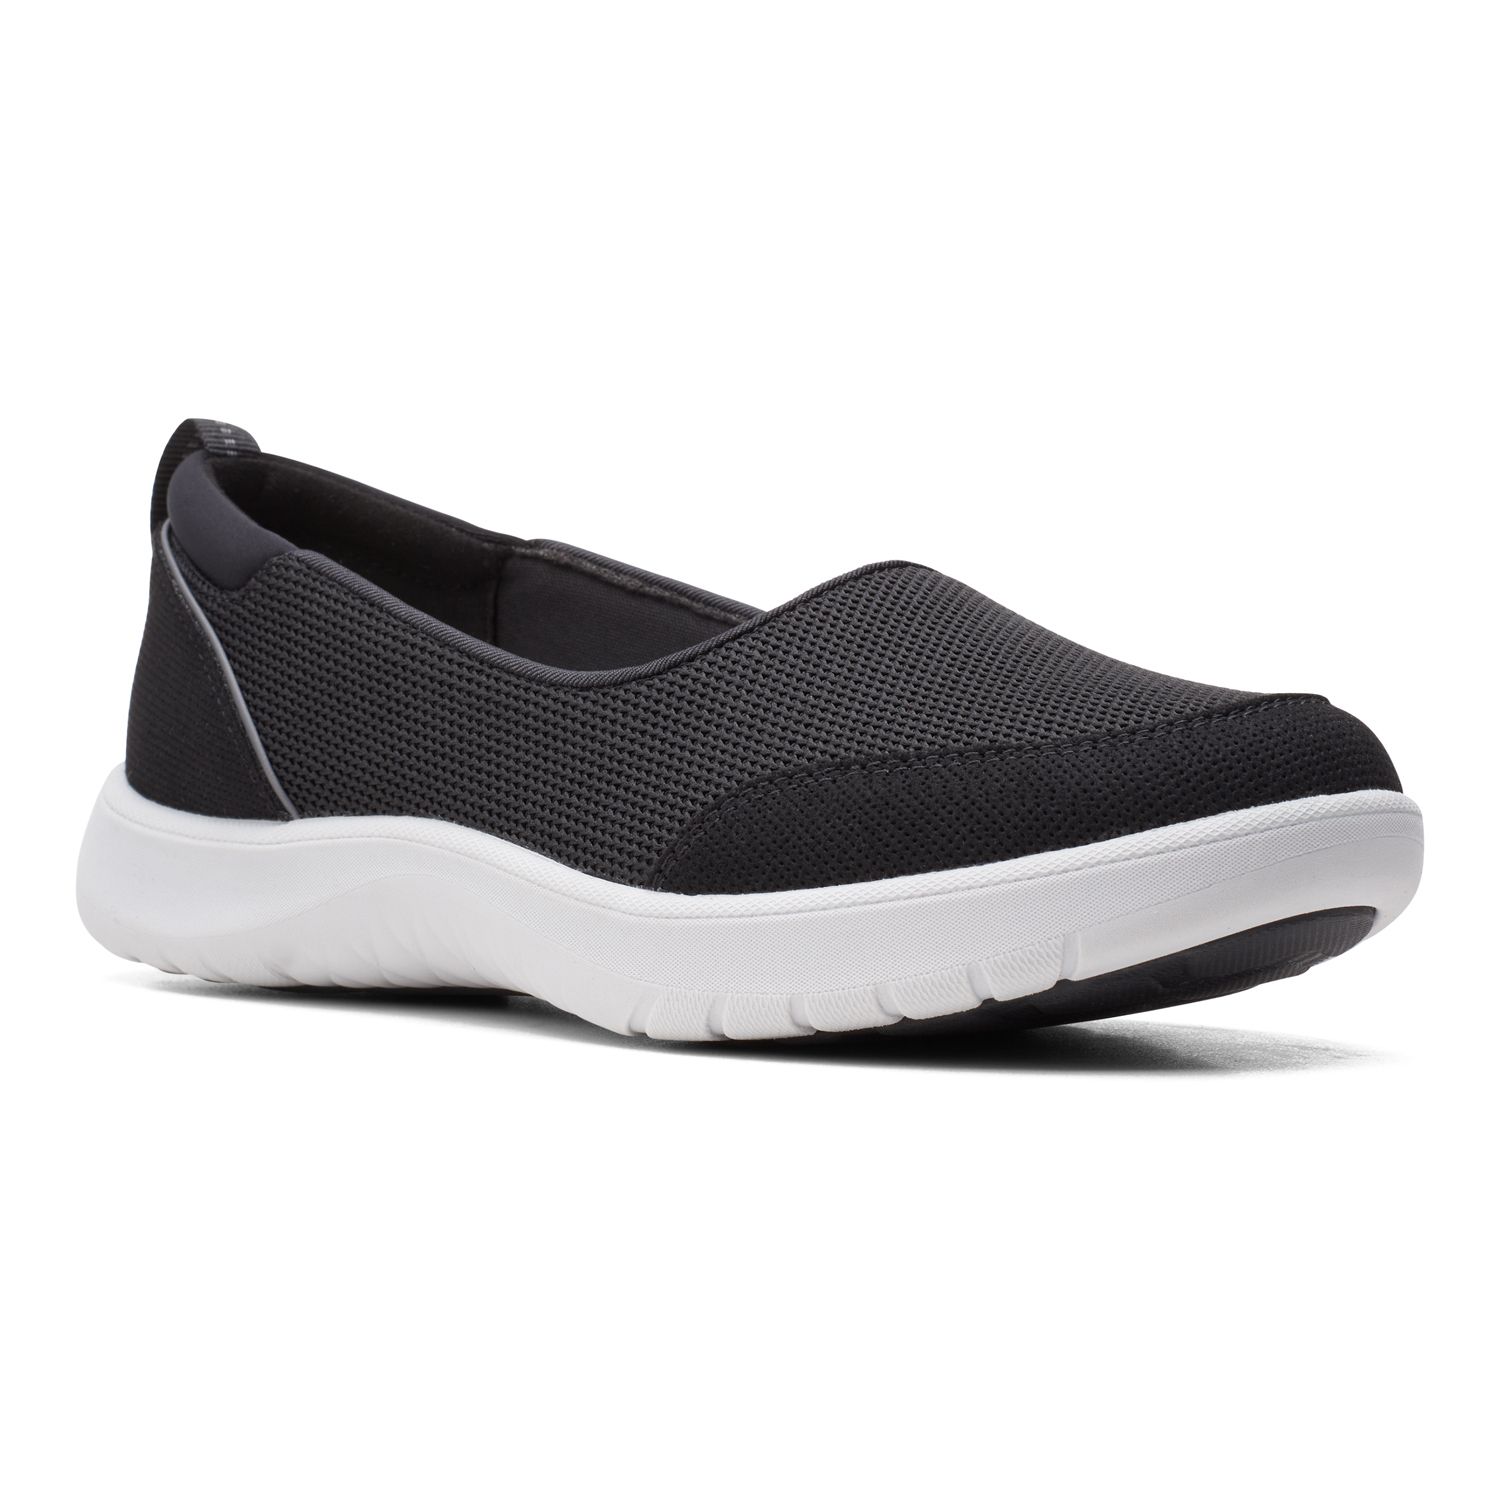 cloudsteppers slip on shoes